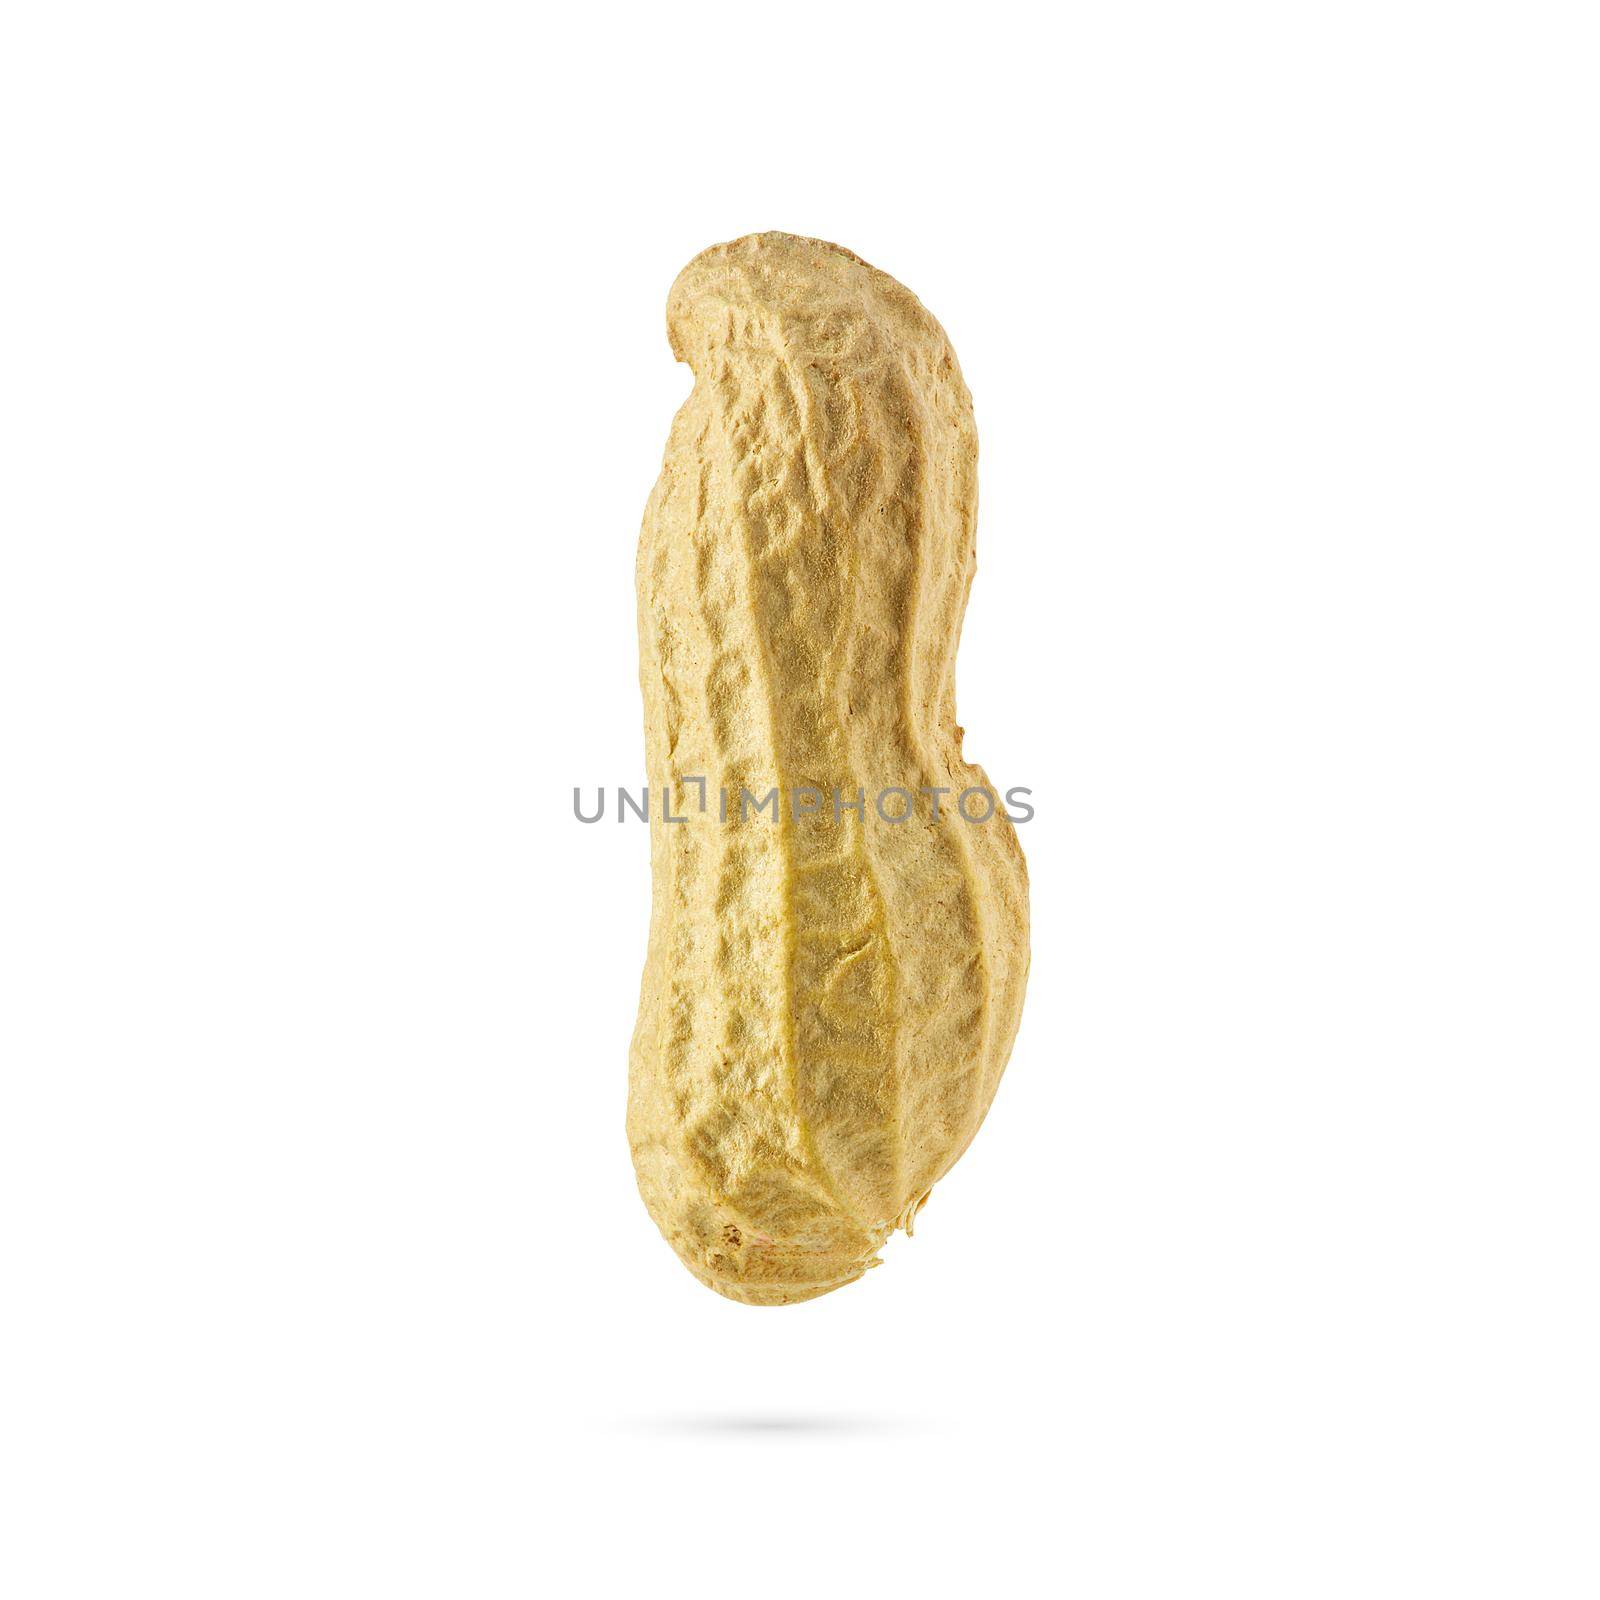 Peanuts isolated on white background, as design element by PhotoTime